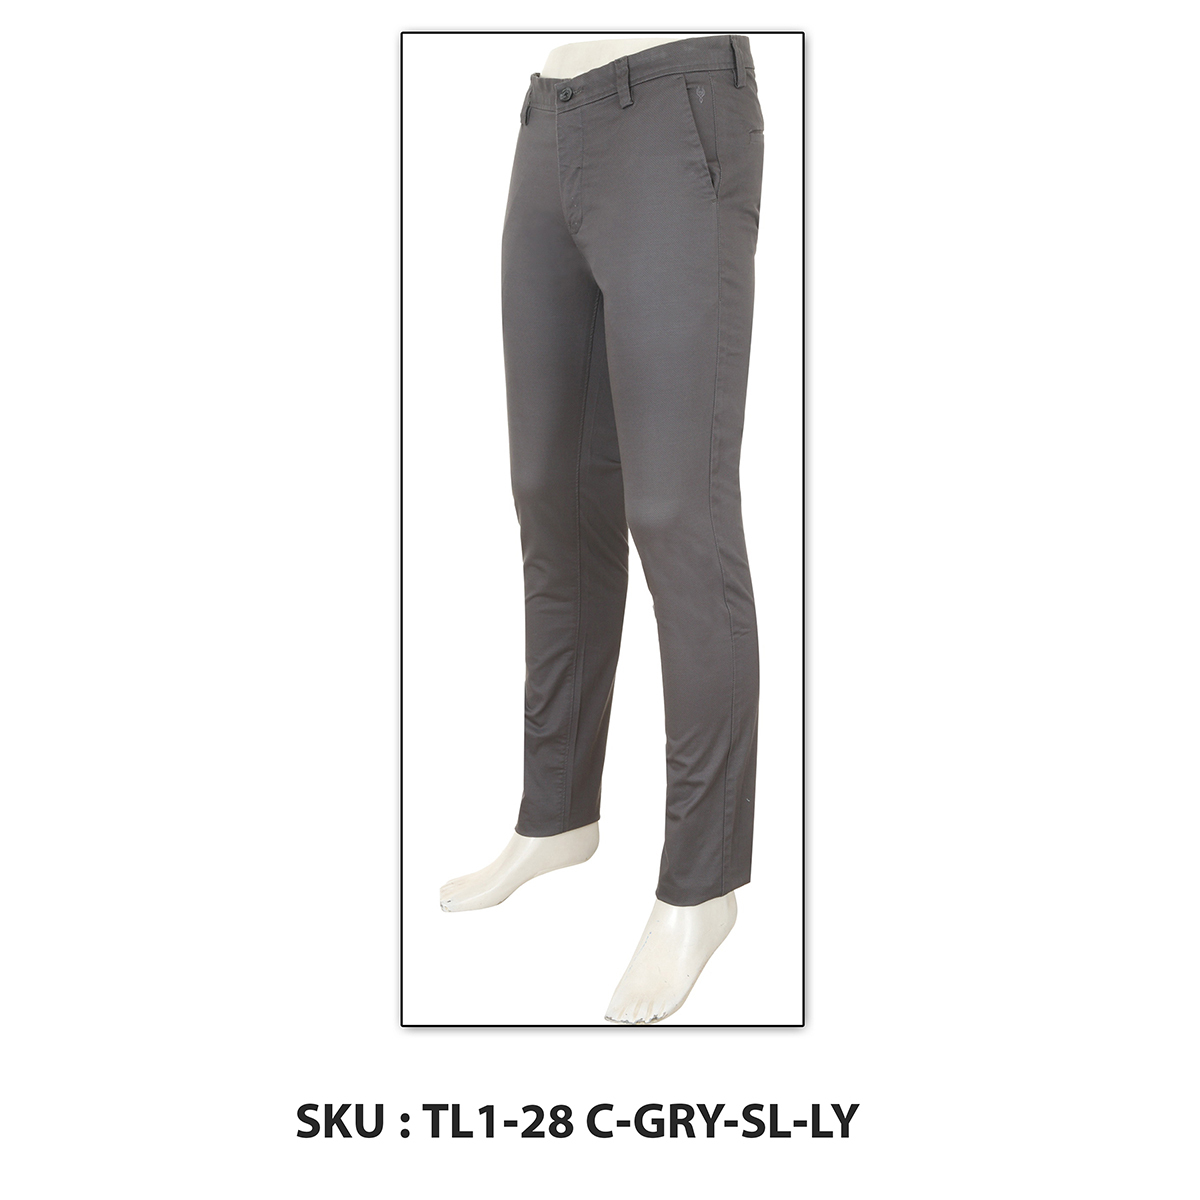 Classic Polo Mens Trousers Tl1-28 C-Gry-Sl-Ly Grey 30